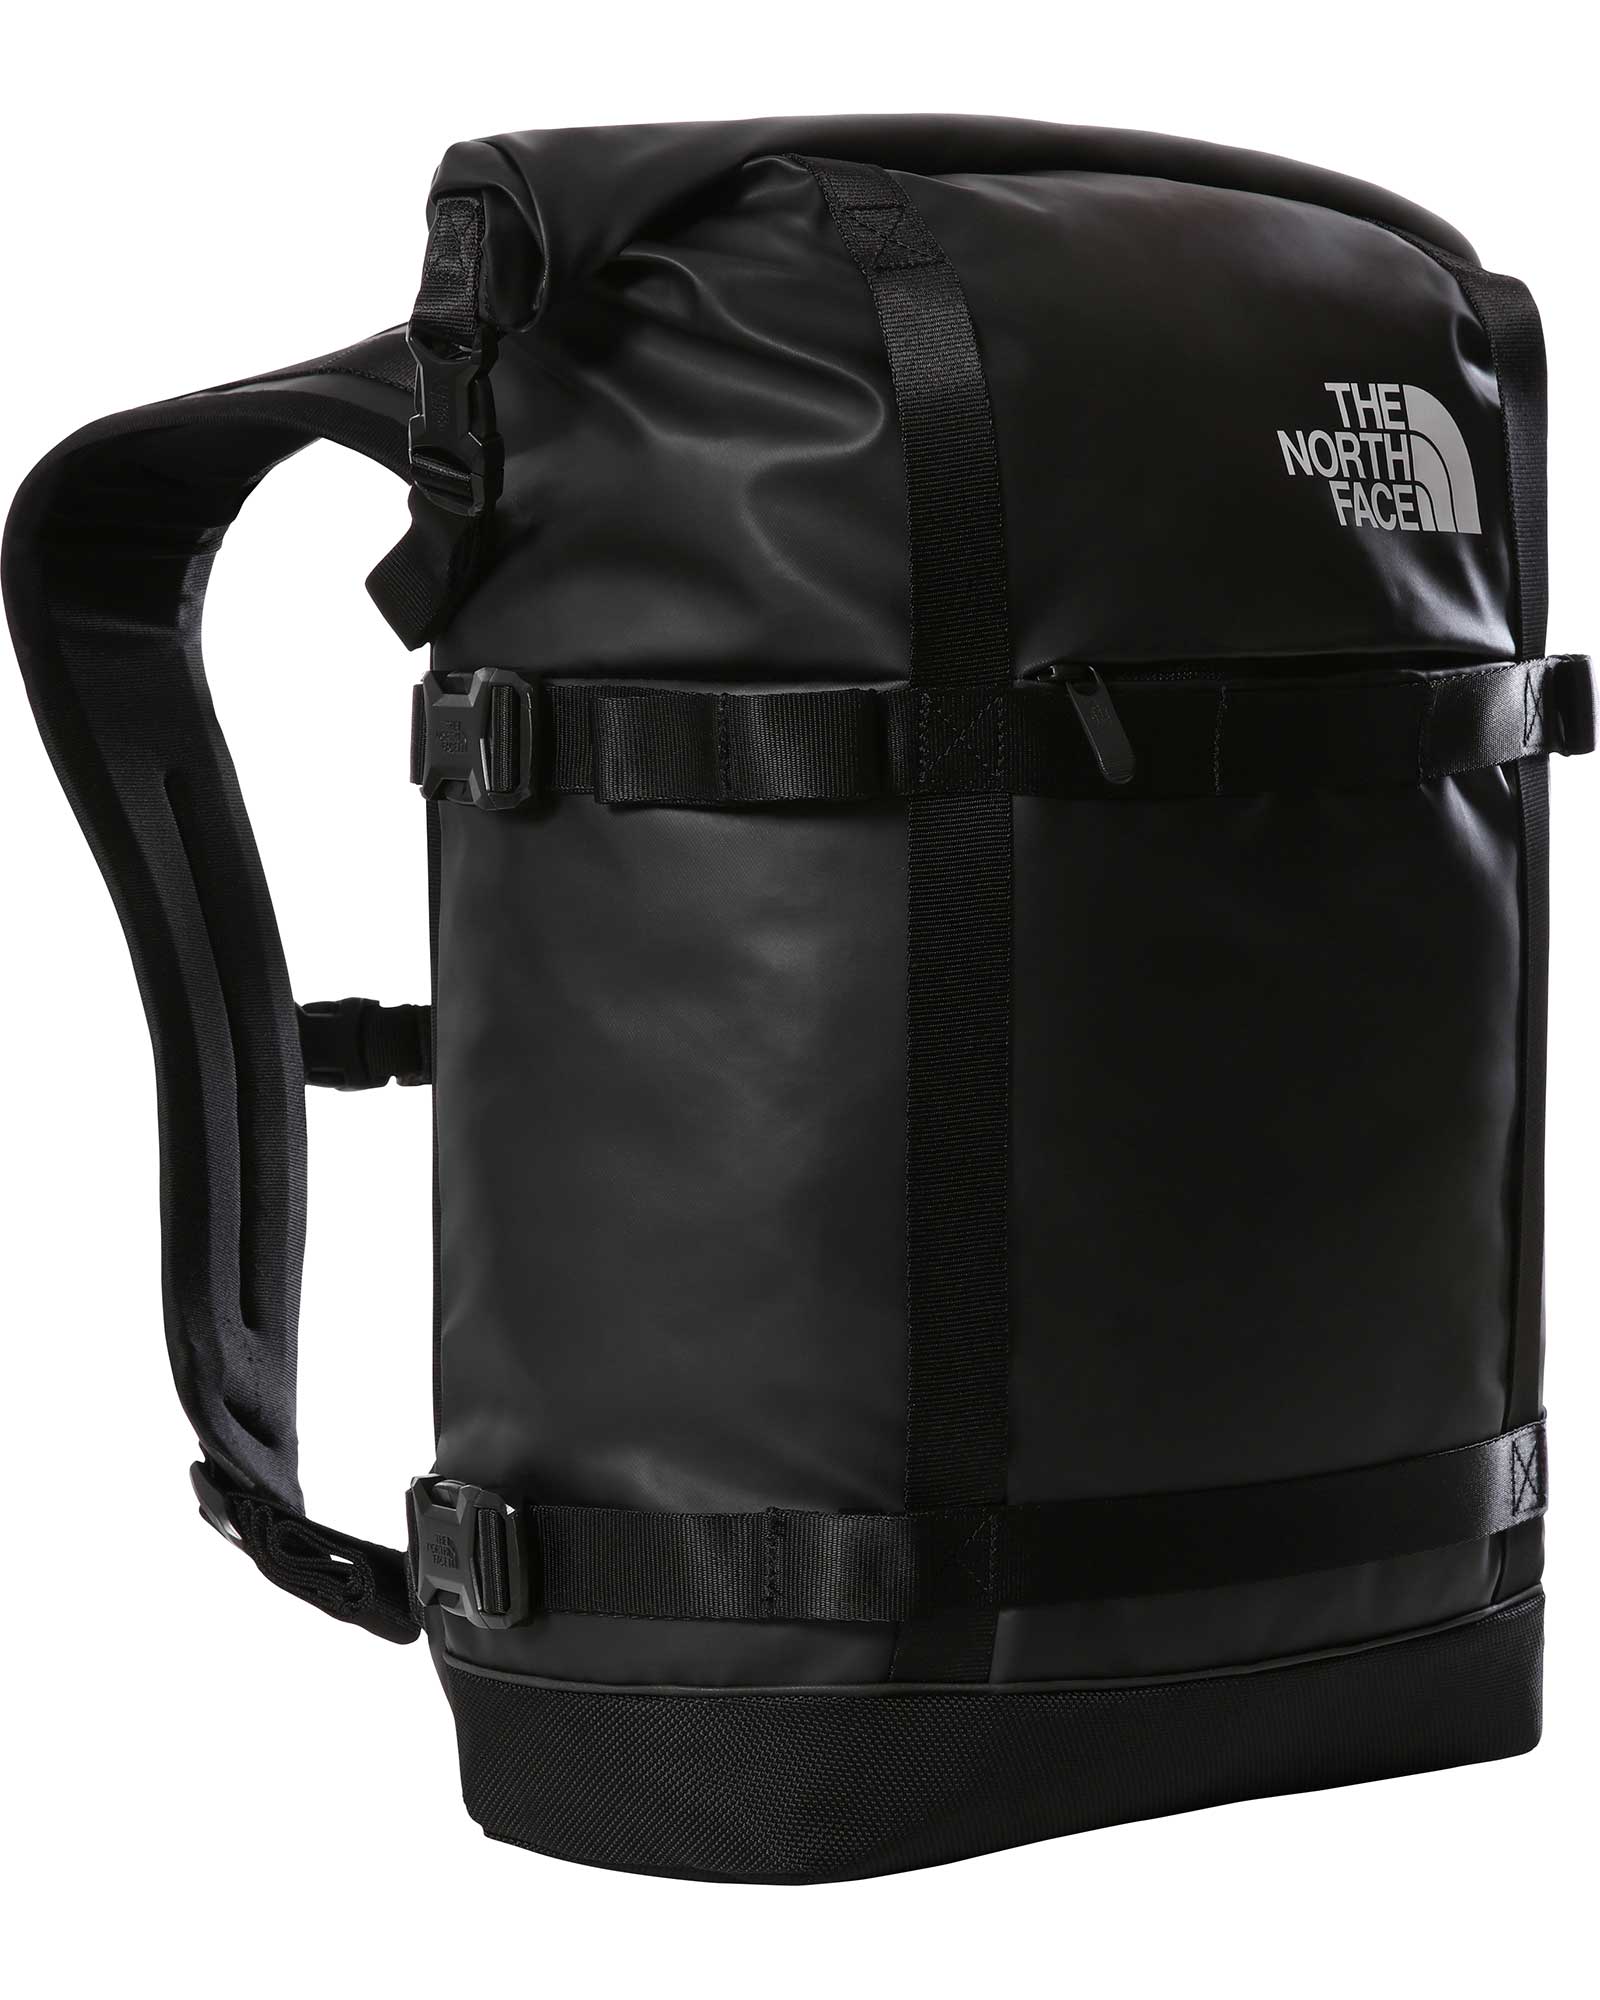 The North Face Commuter Pack Roll Top Backpack | Ellis Sports